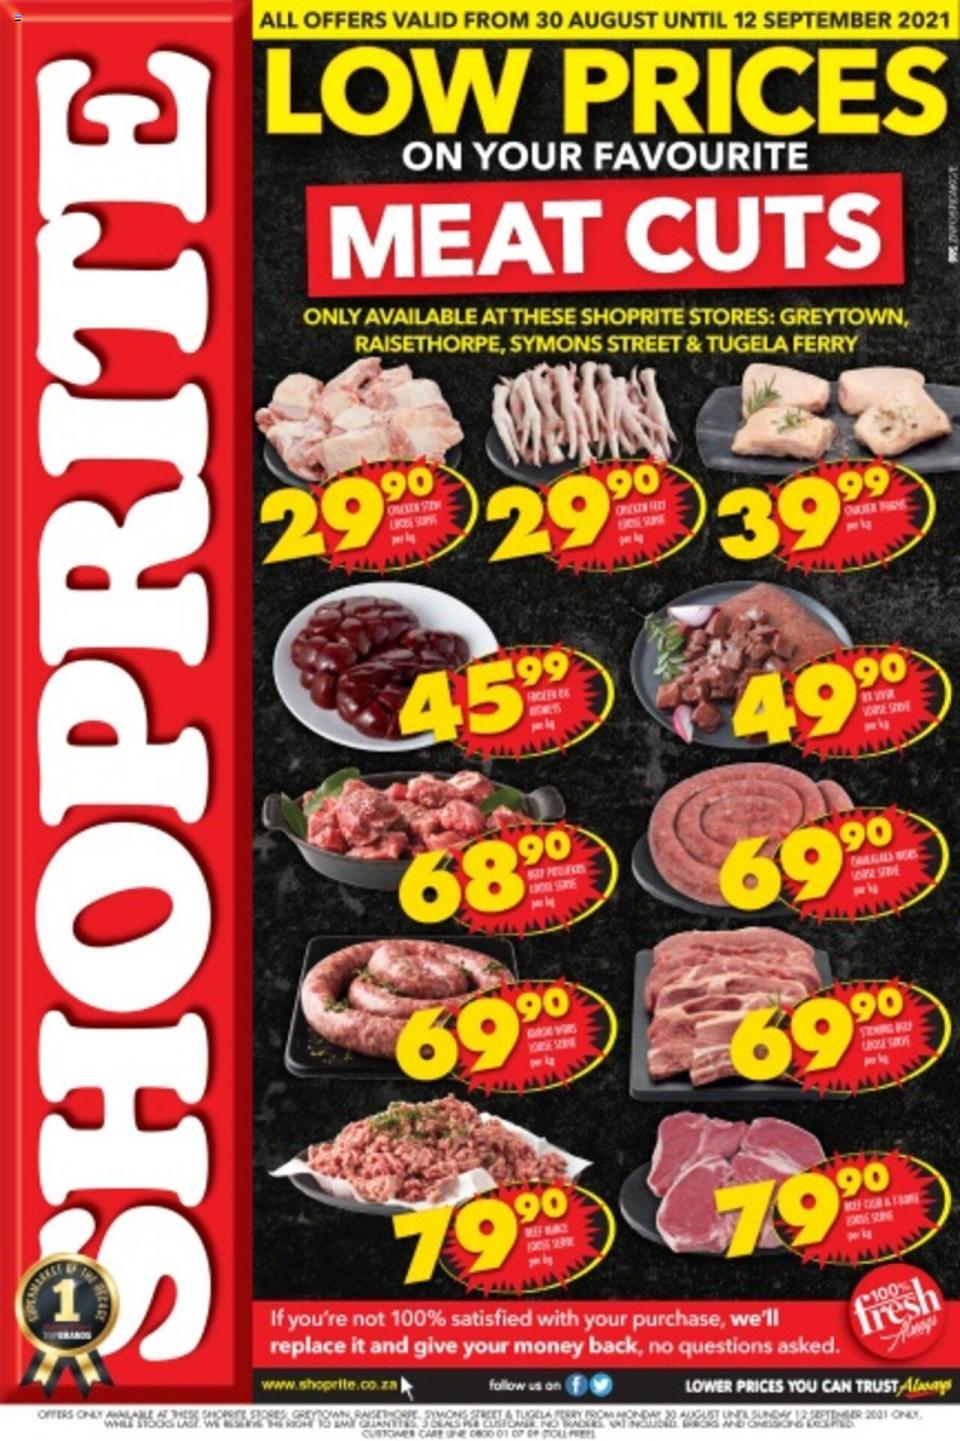 Shoprite Specials Low Prices On Meat Cuts 30 Aug – 12 Sep 2021